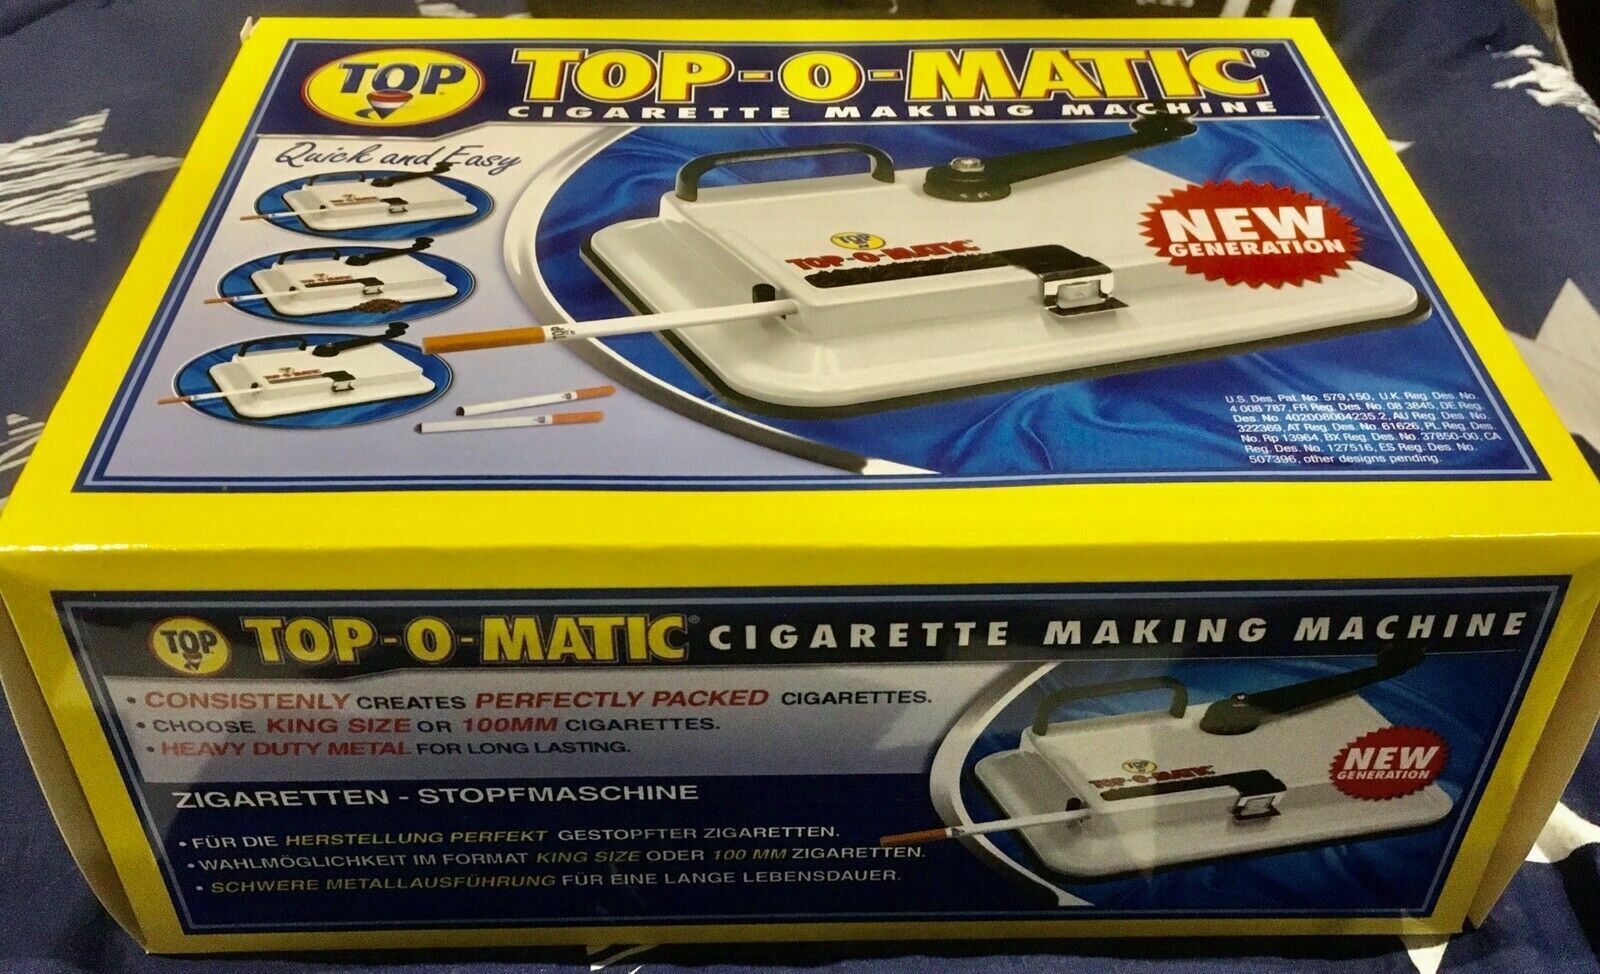 TOP Machine Top O Matic Makes 100's and Kings – Tobacco Stock